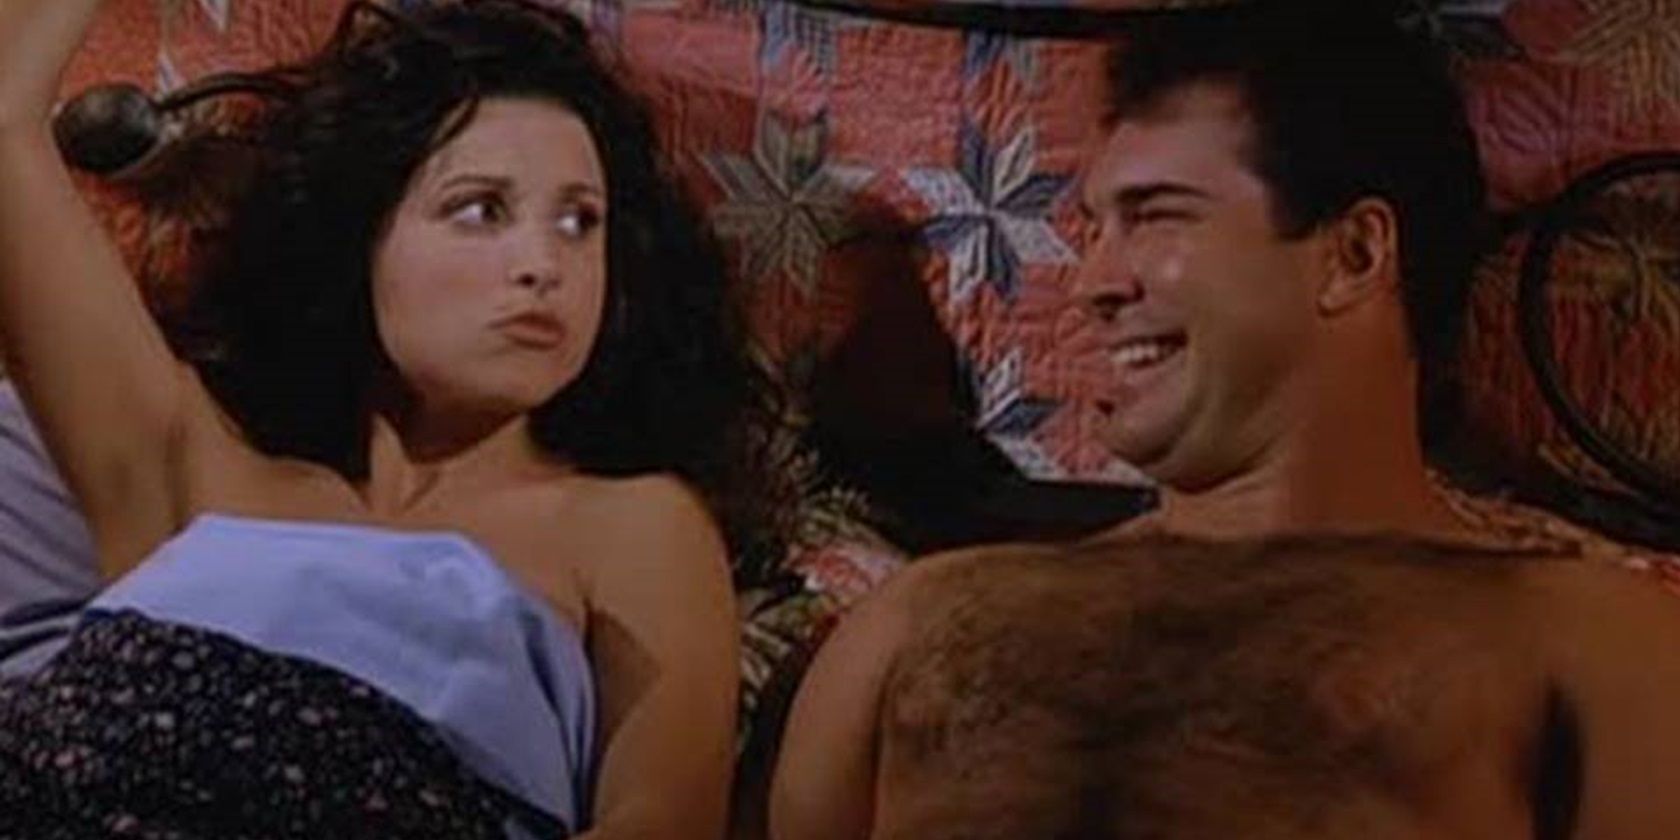 Elaine Benes and David Puddy in bed on Seinfeld